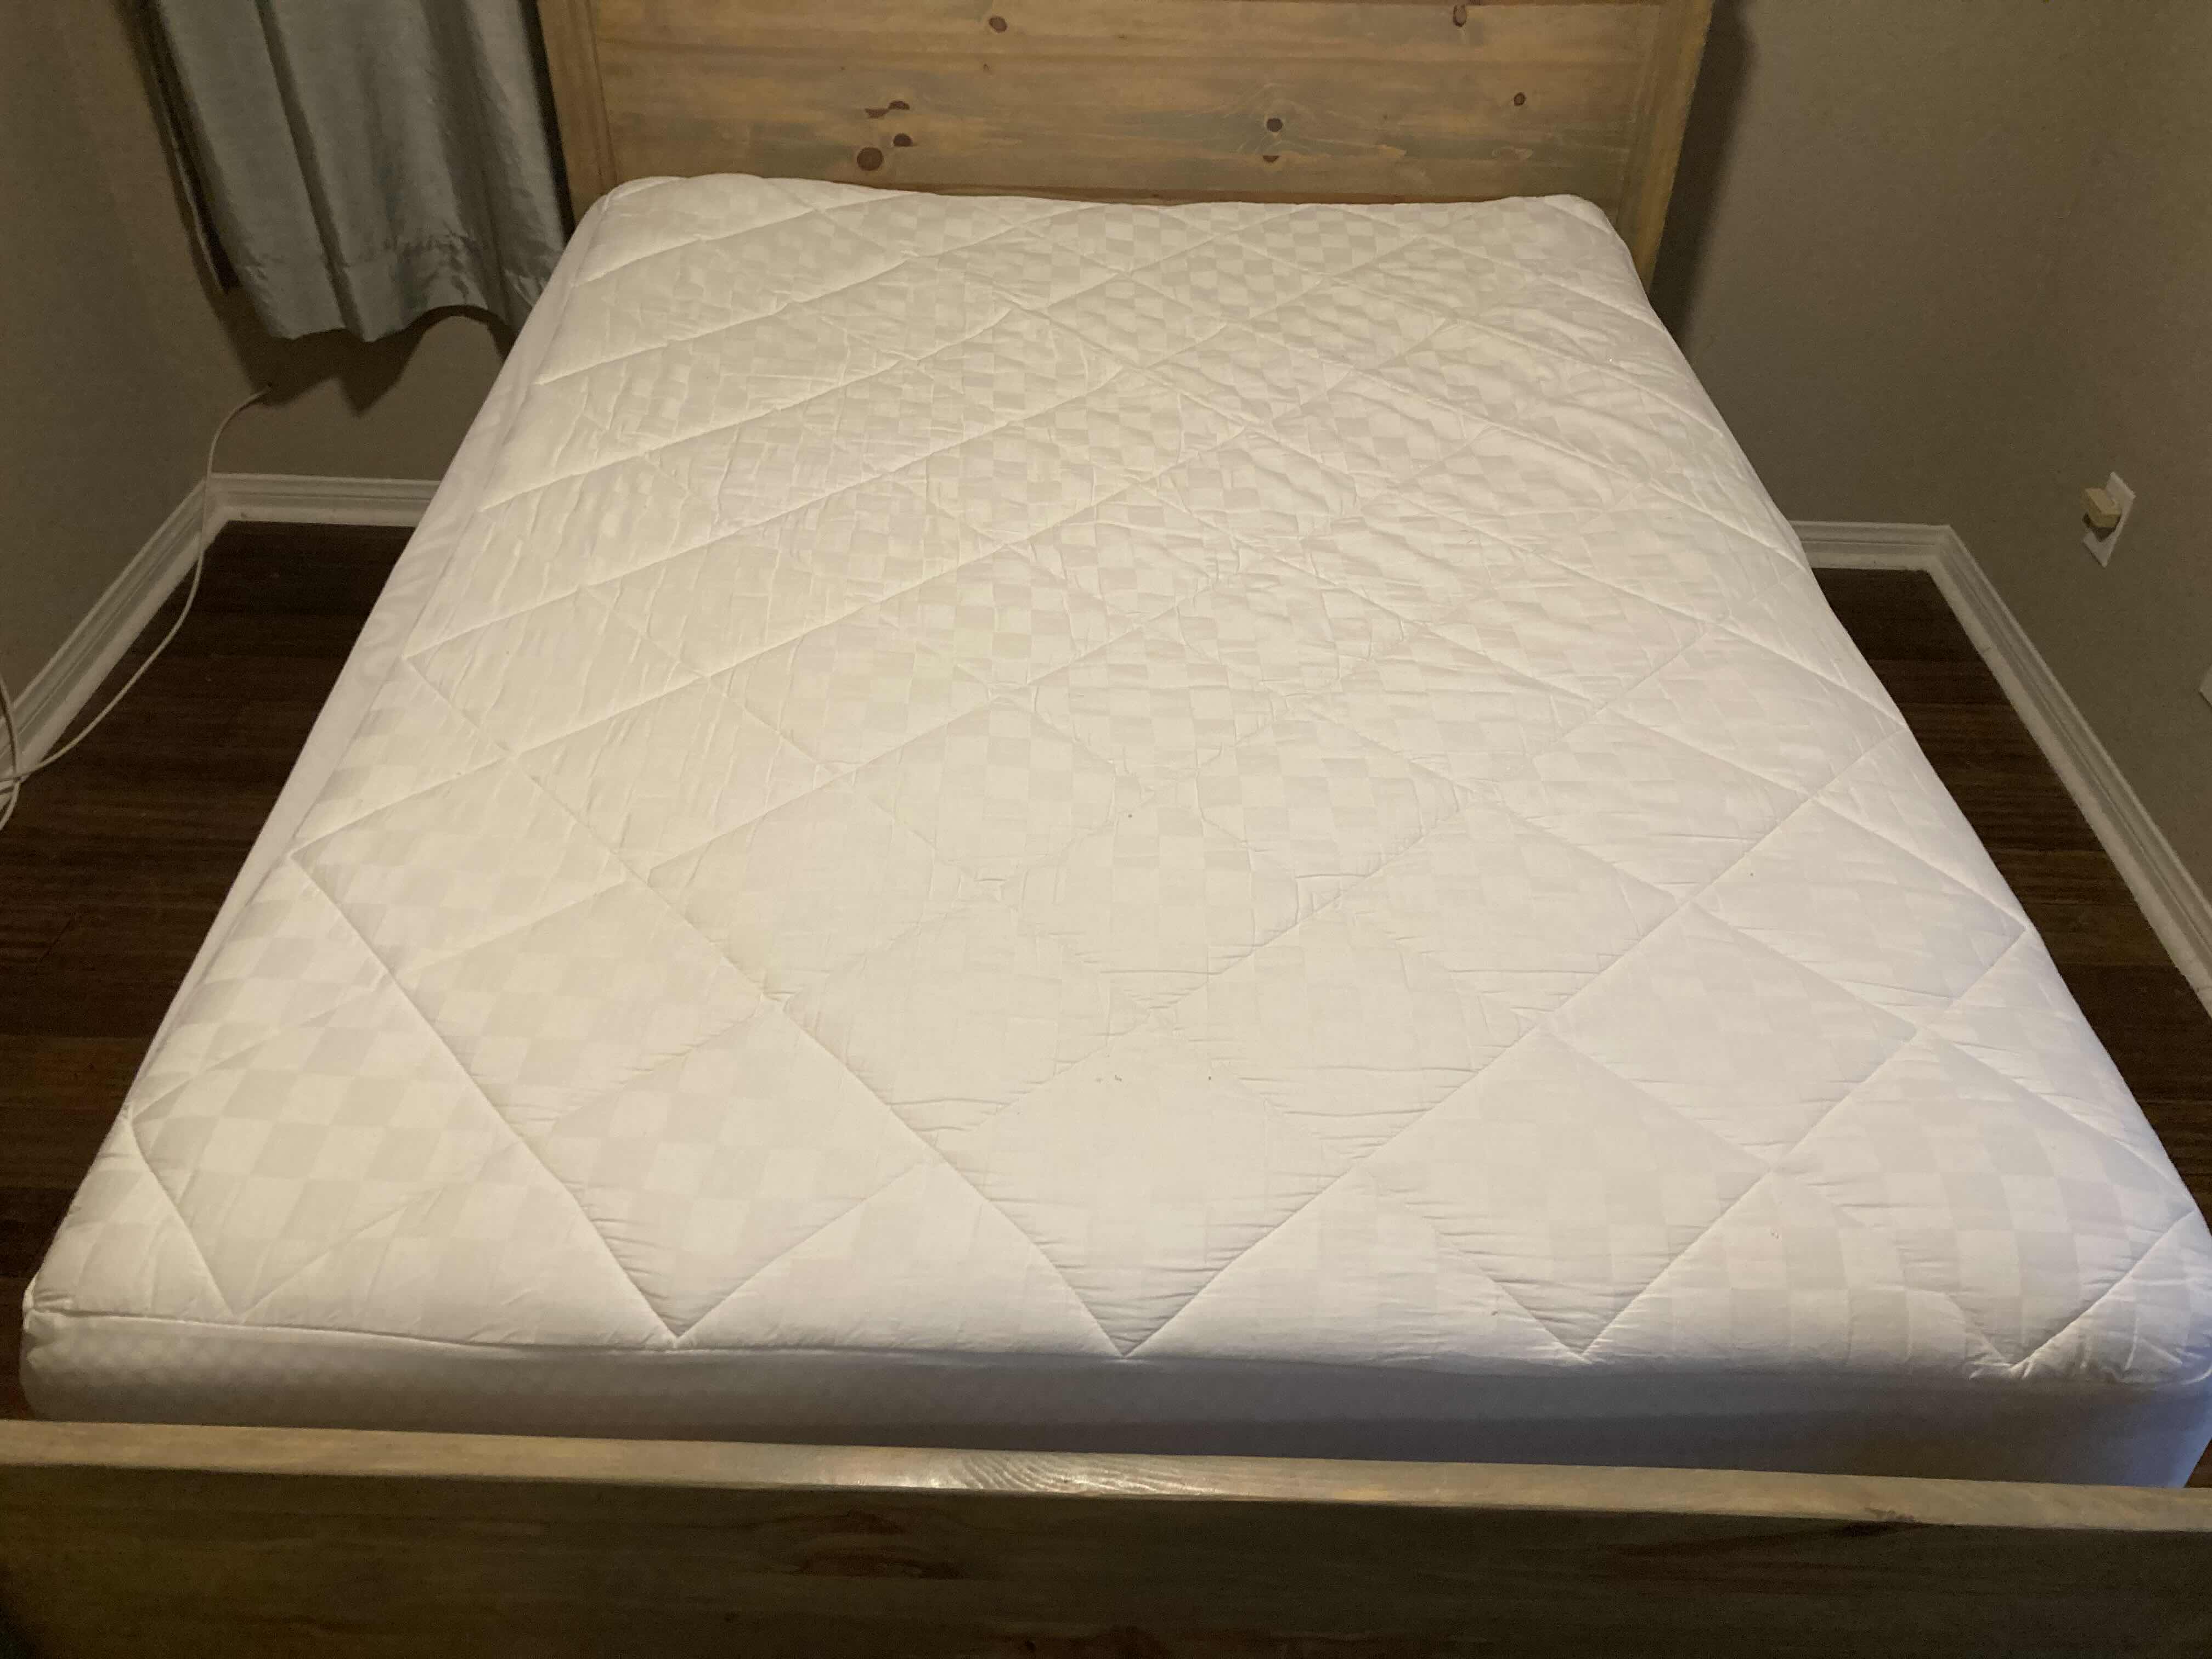 Photo 5 of PINE TWO TONE WOOD FULL SIZE BED FRAME W SEALY POSTURE-PEDIC HYBRID MATTRESS & BOX SPRING